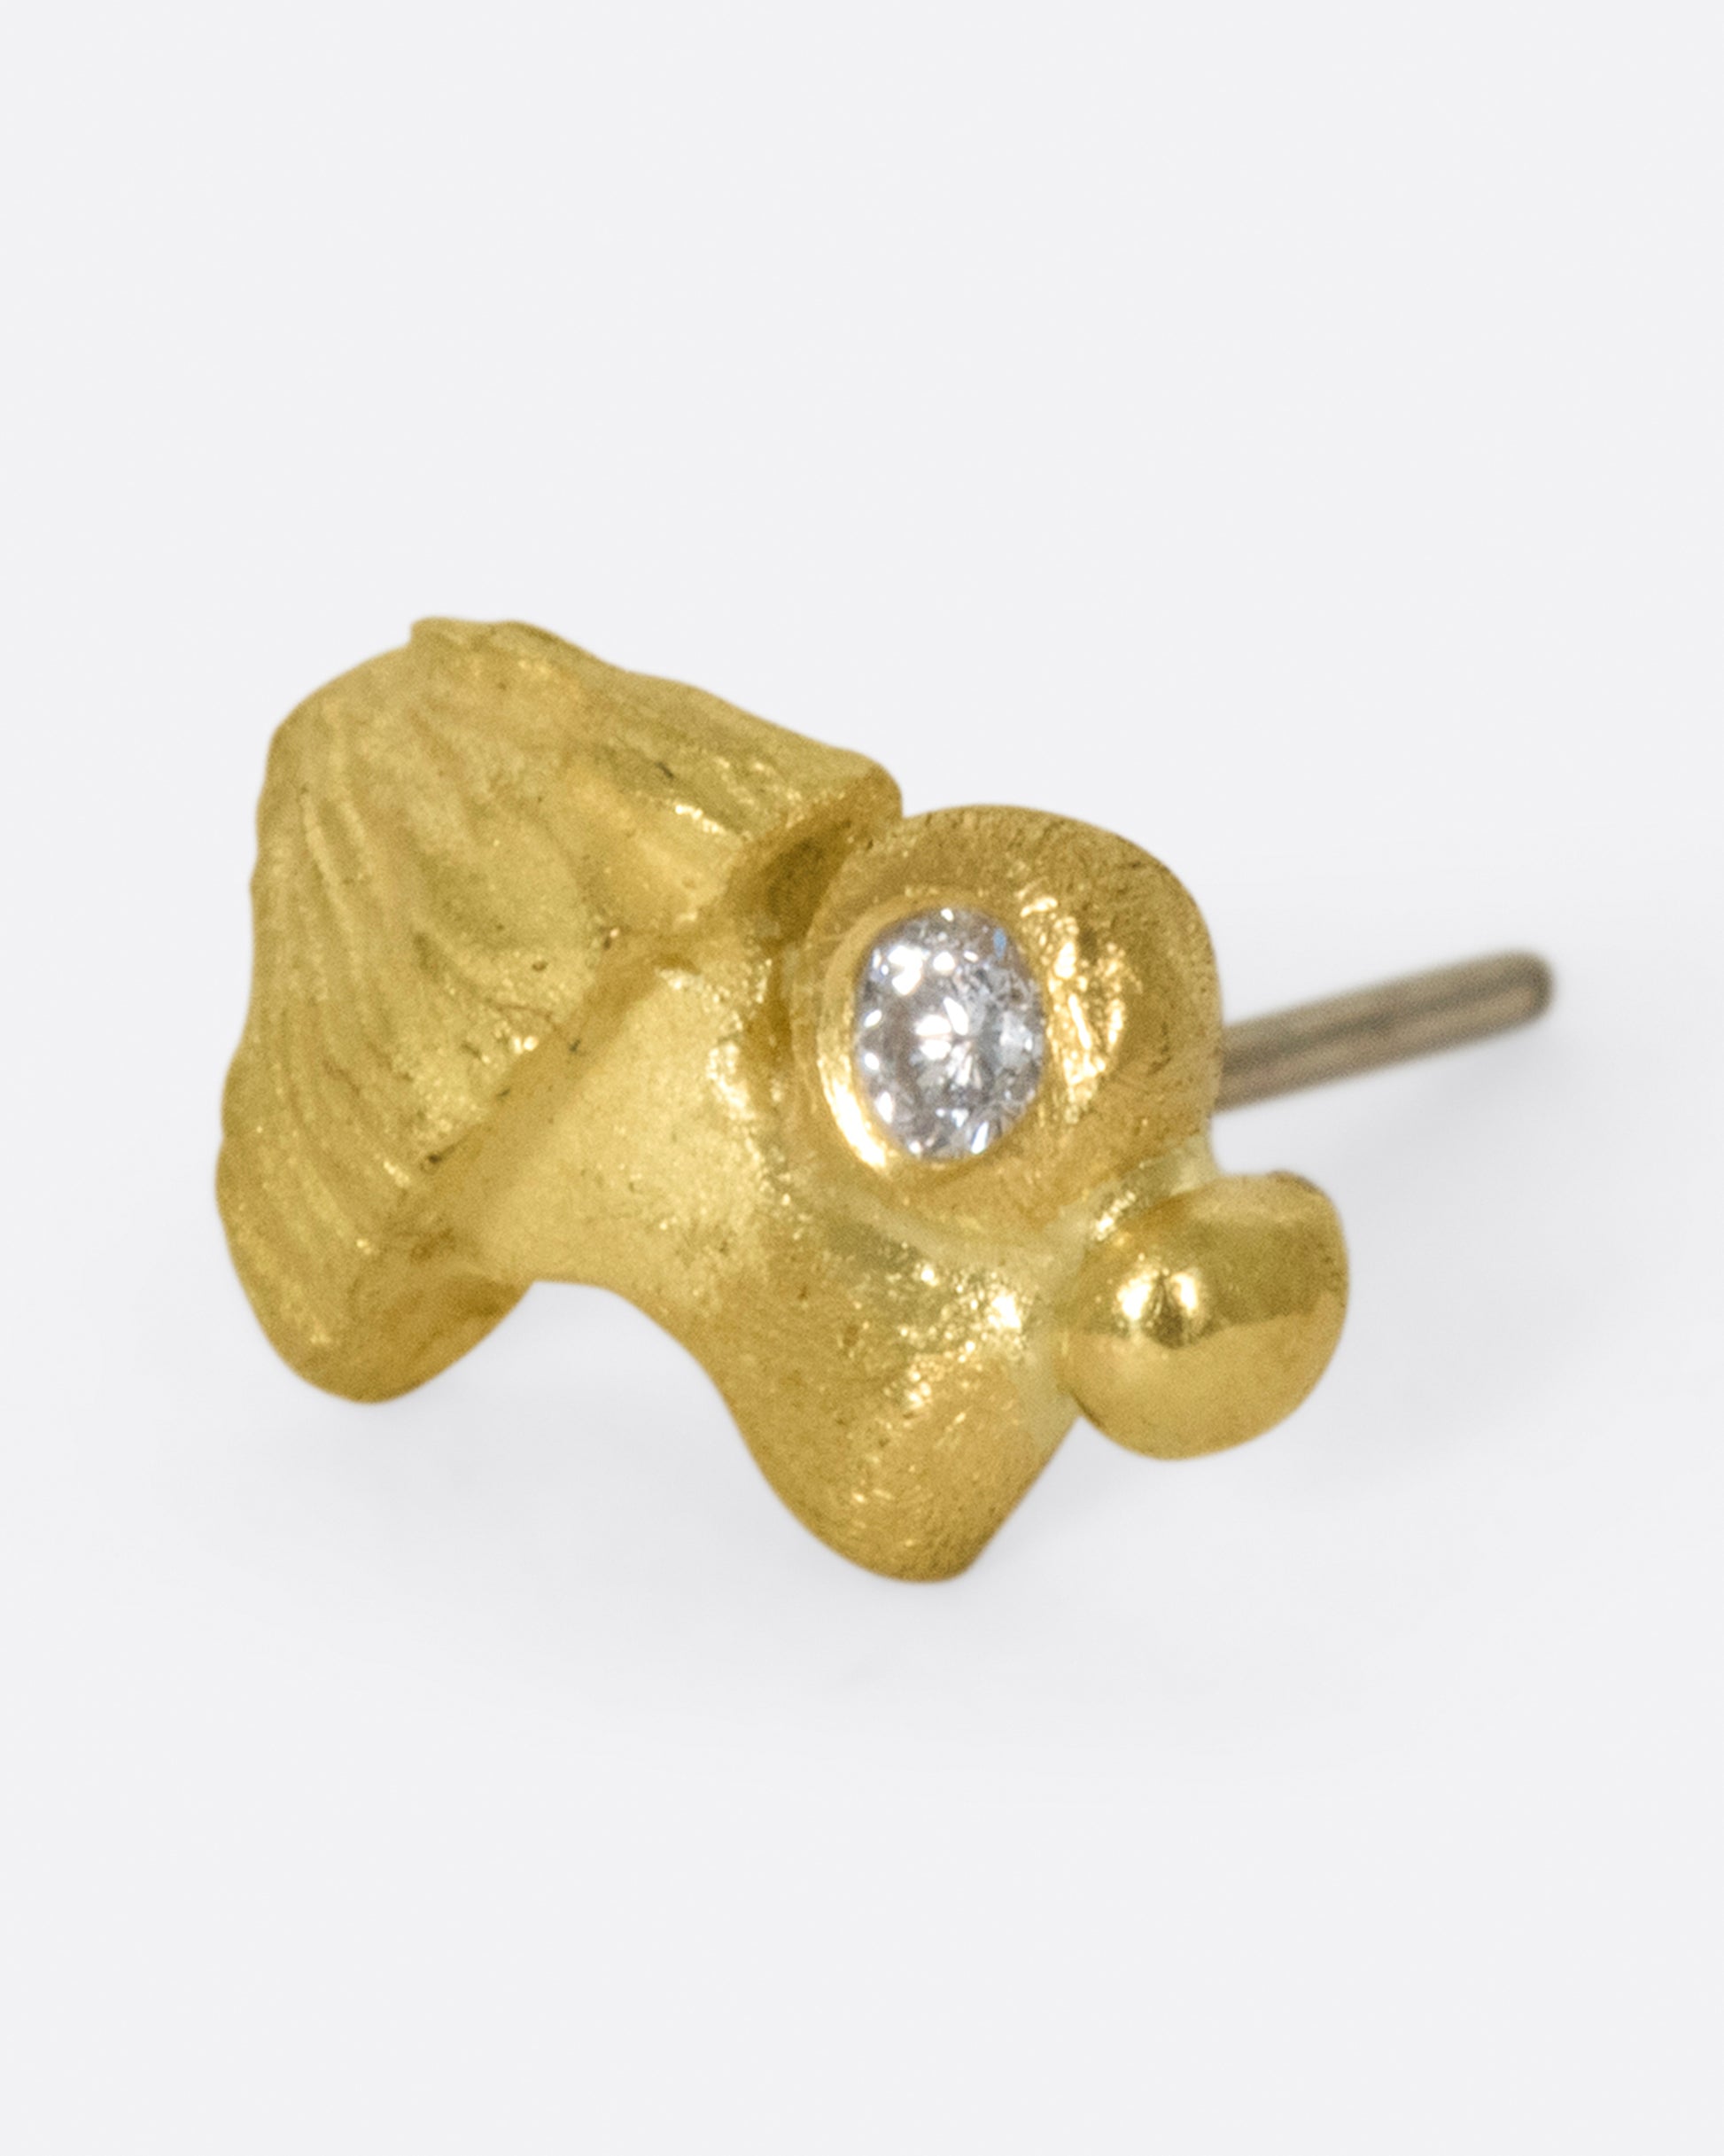 Matte gold and hand carved, this little fungus remains subtle on the ear.